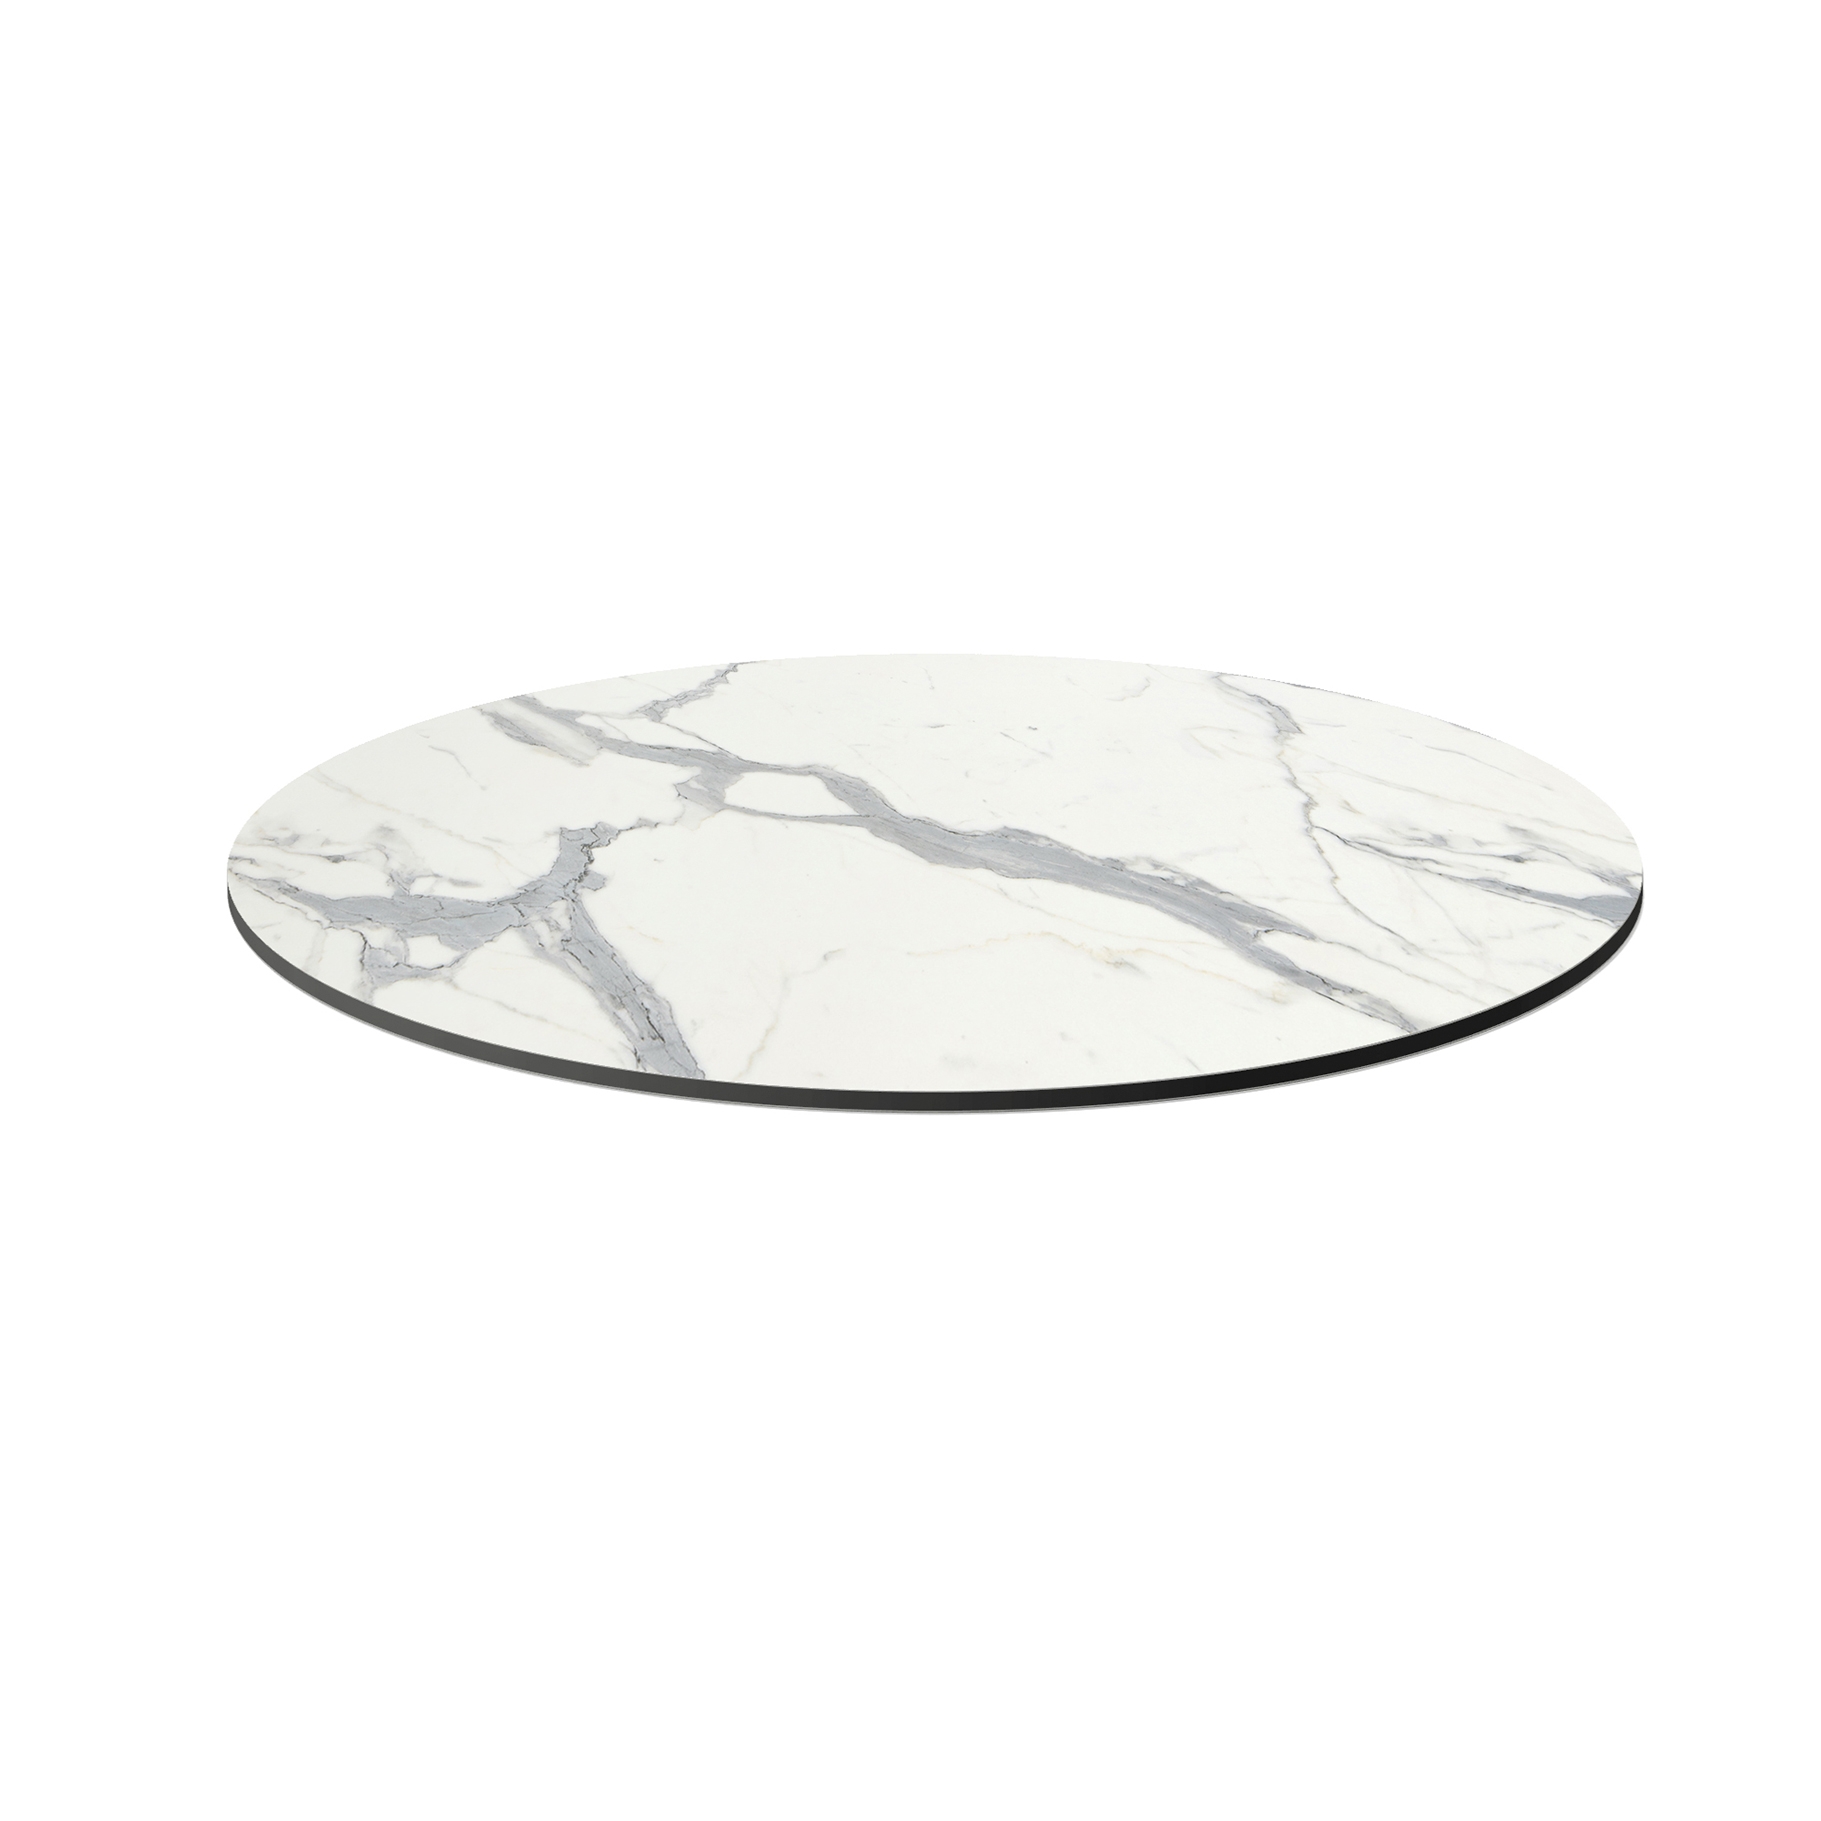 'Stone' Compact Laminate Table Tops